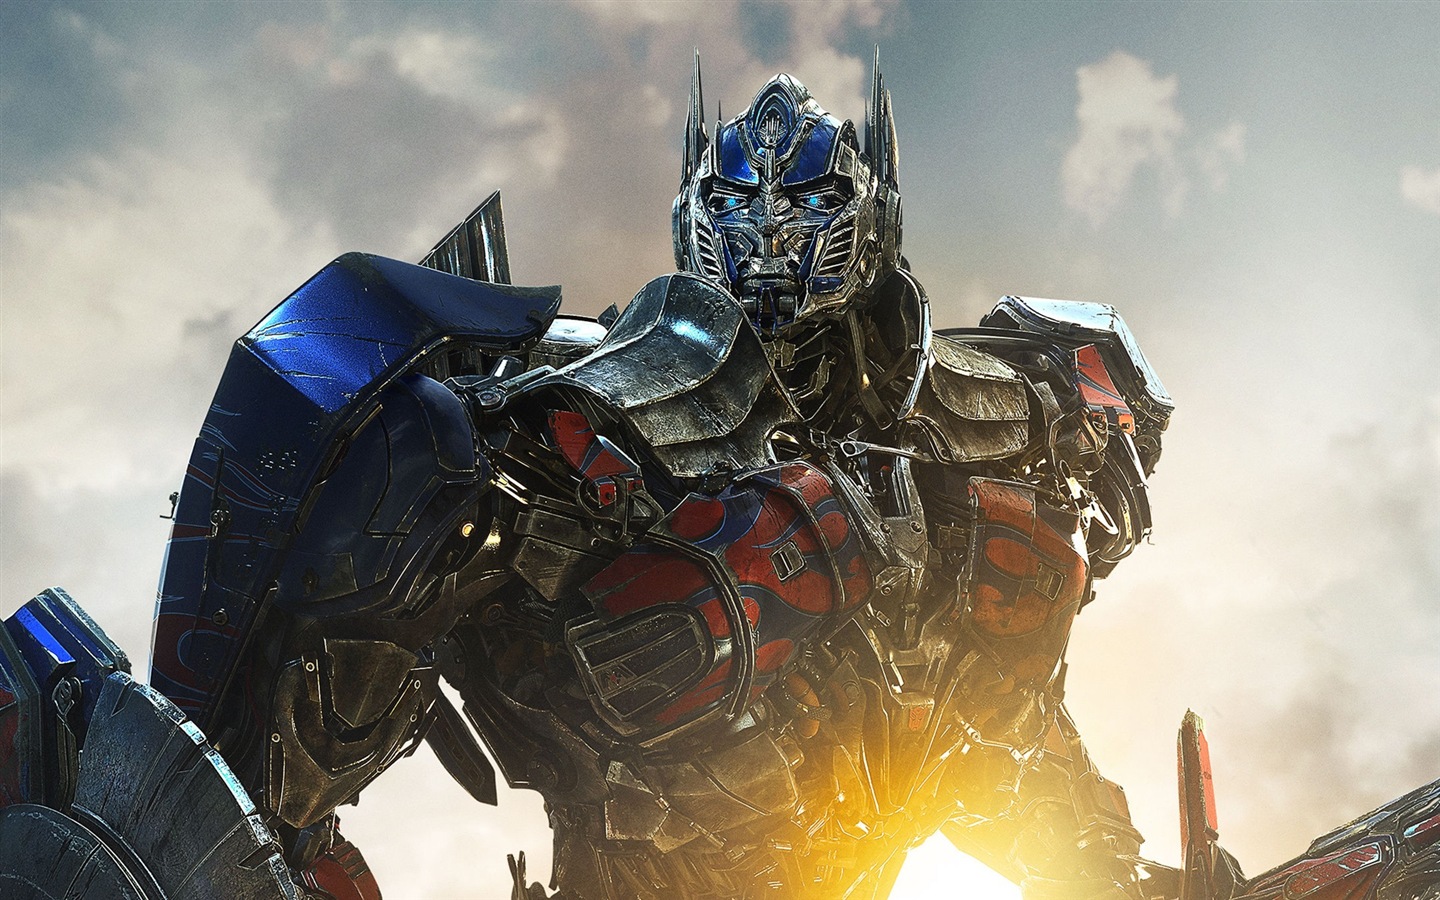 2014 Transformers: Age of Extinction HD tapety #2 - 1440x900